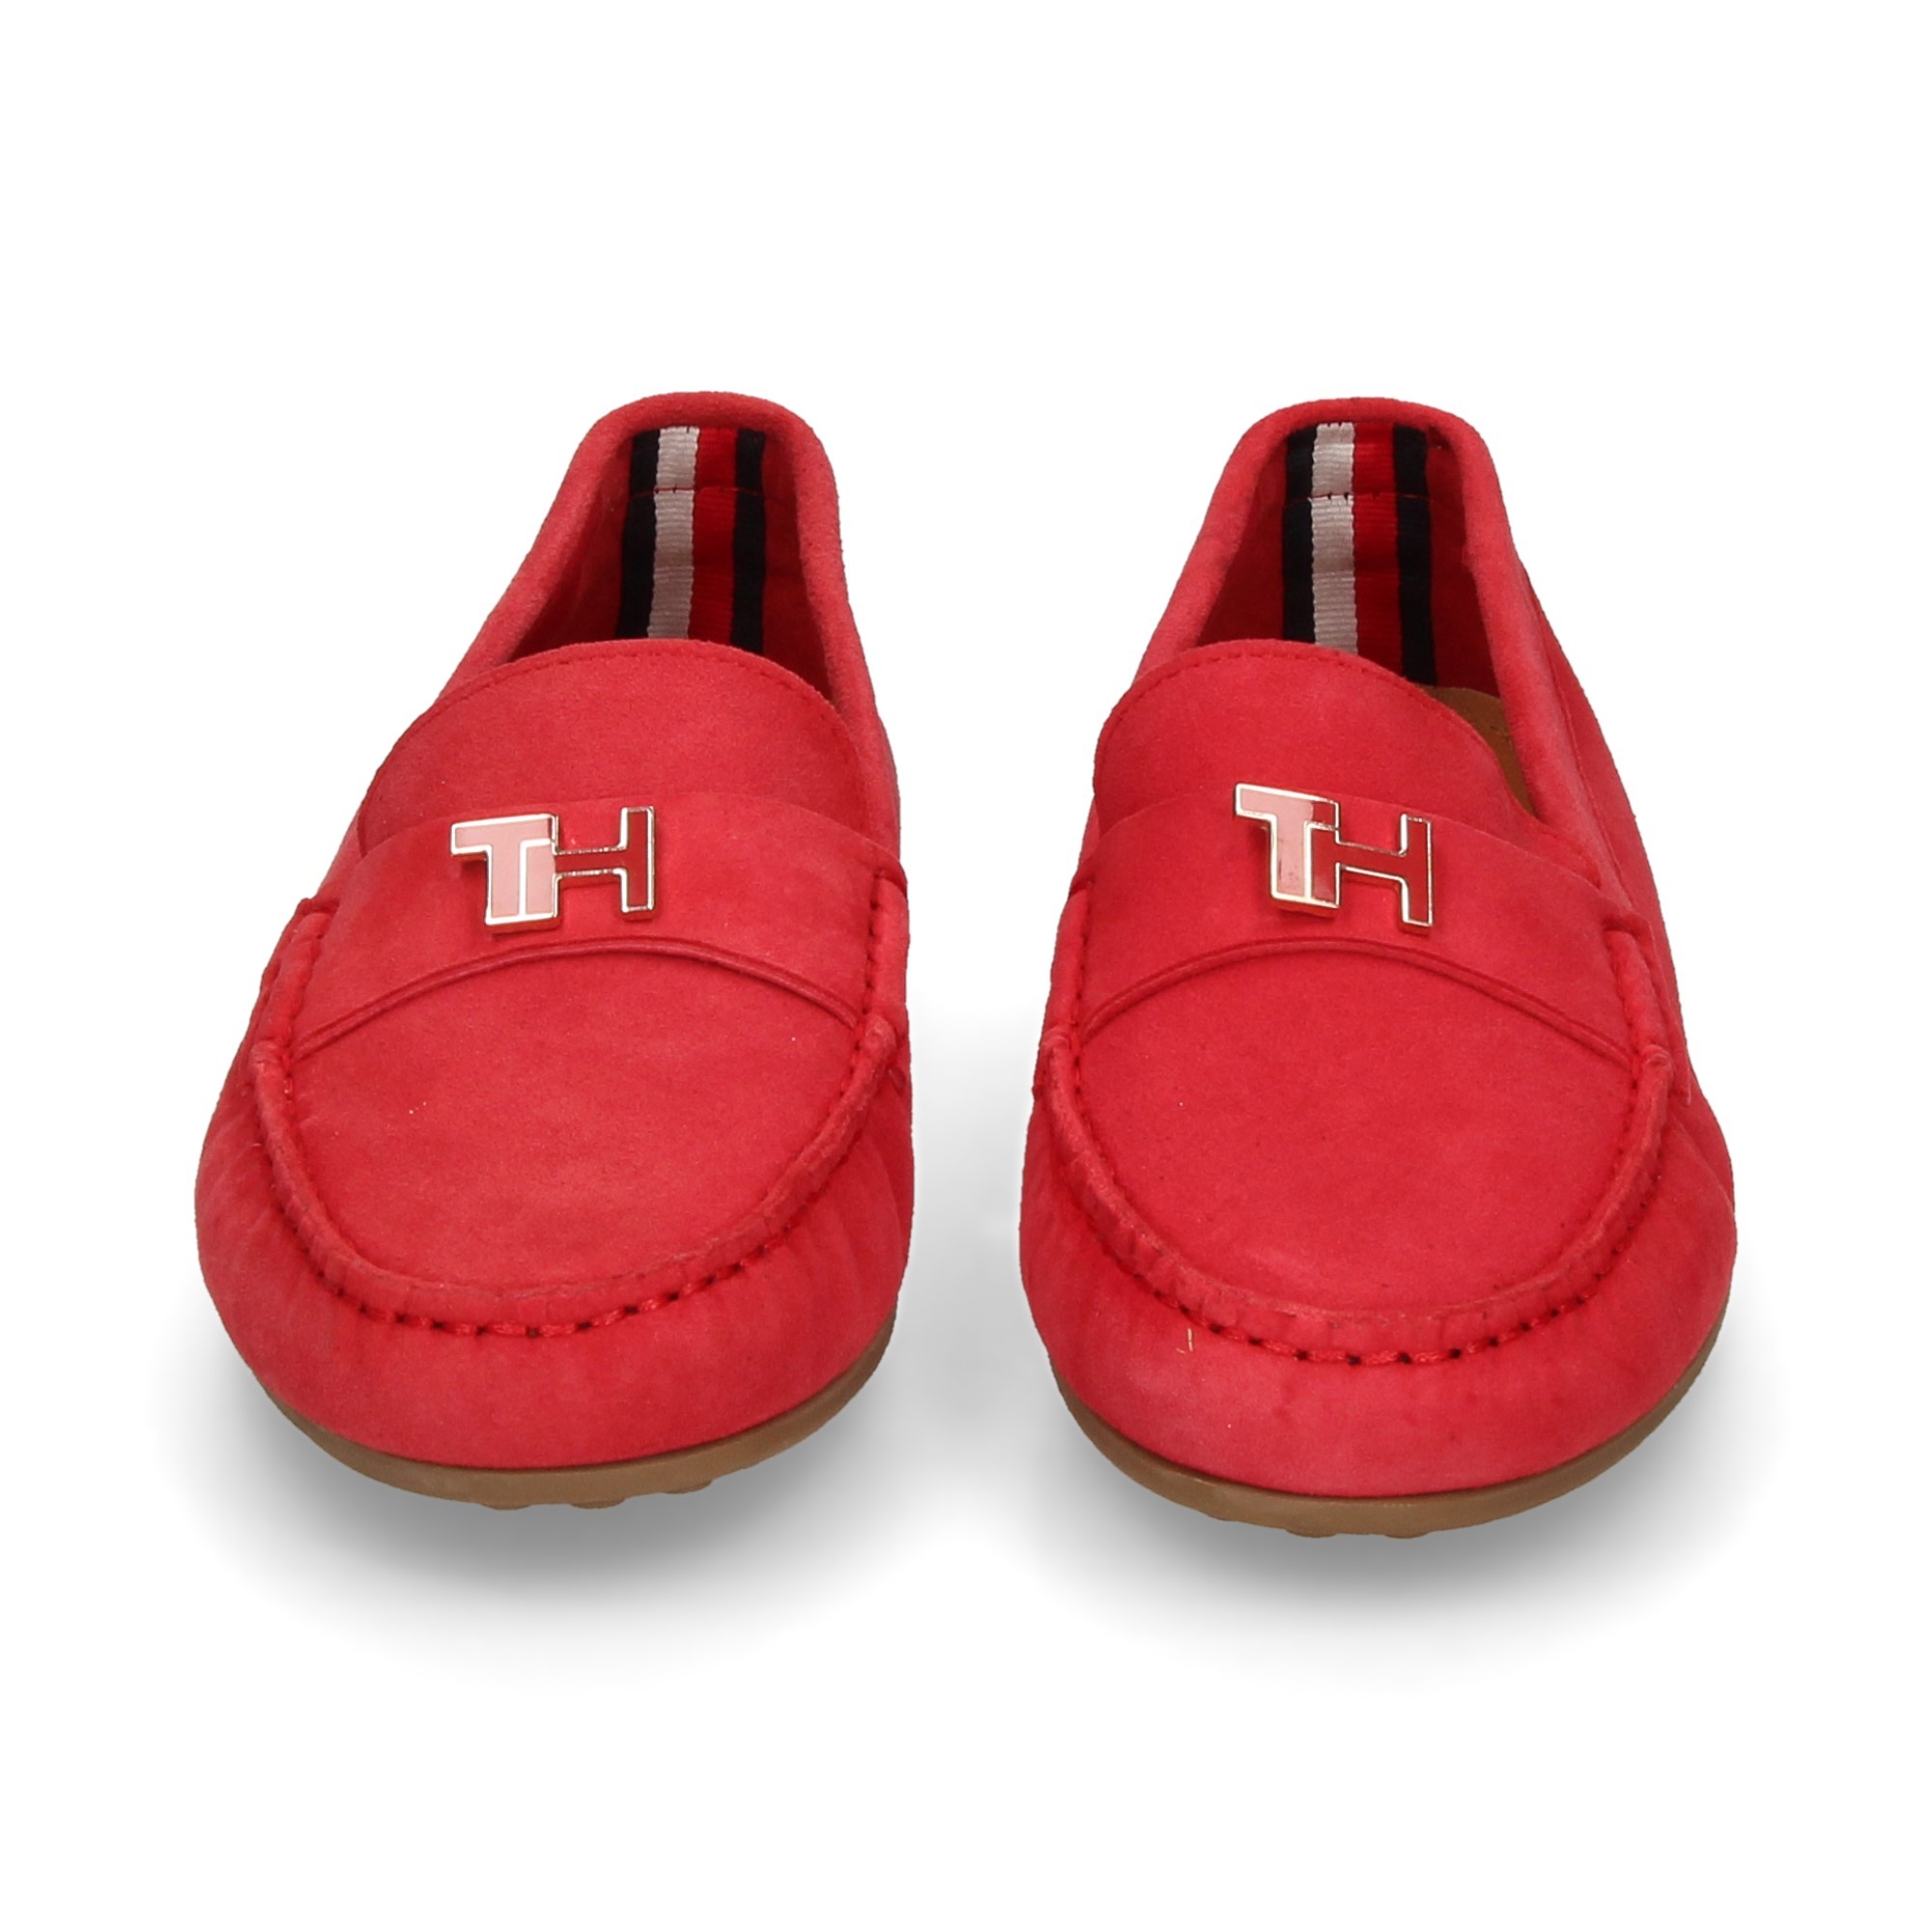 moccasin-adorned-suede-rot